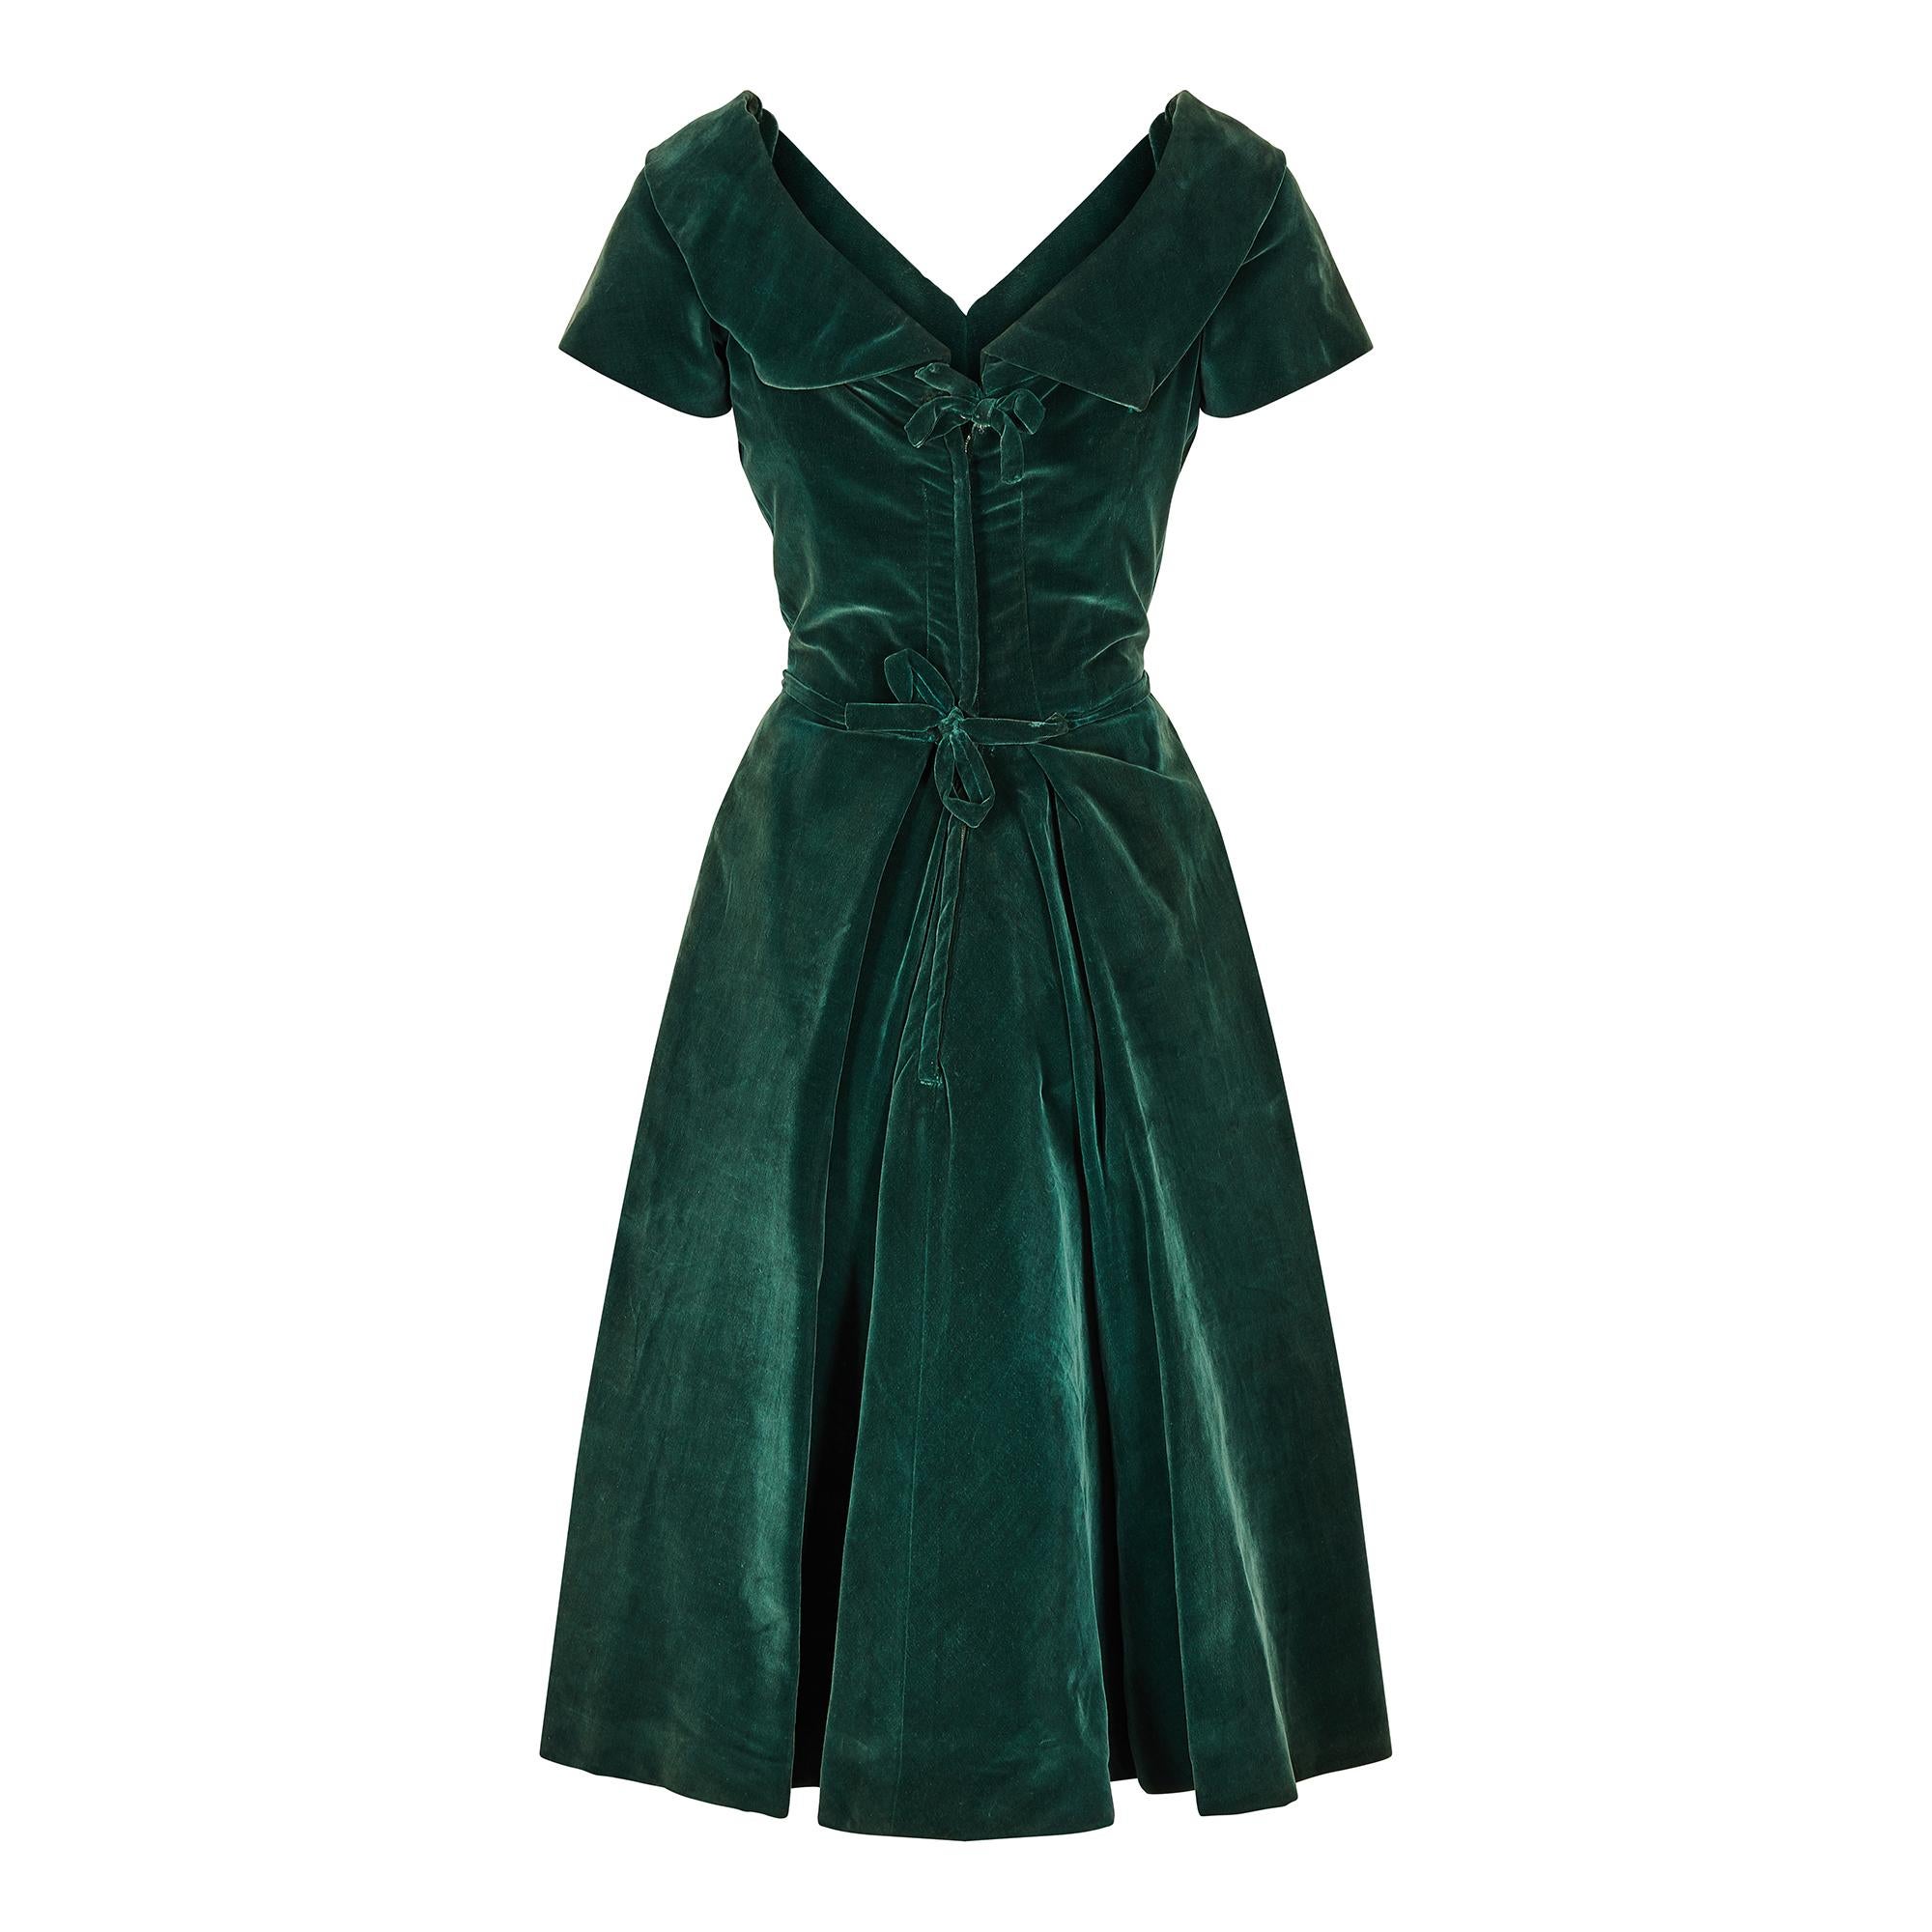 This early 1950s velvet dress is an incredible example of formal evening wear from the 1950s by Ray Hildebrand and also features the retail label Tula of Windsor. It is made from a thick forest green cotton velvet and is beautifully panelled on the